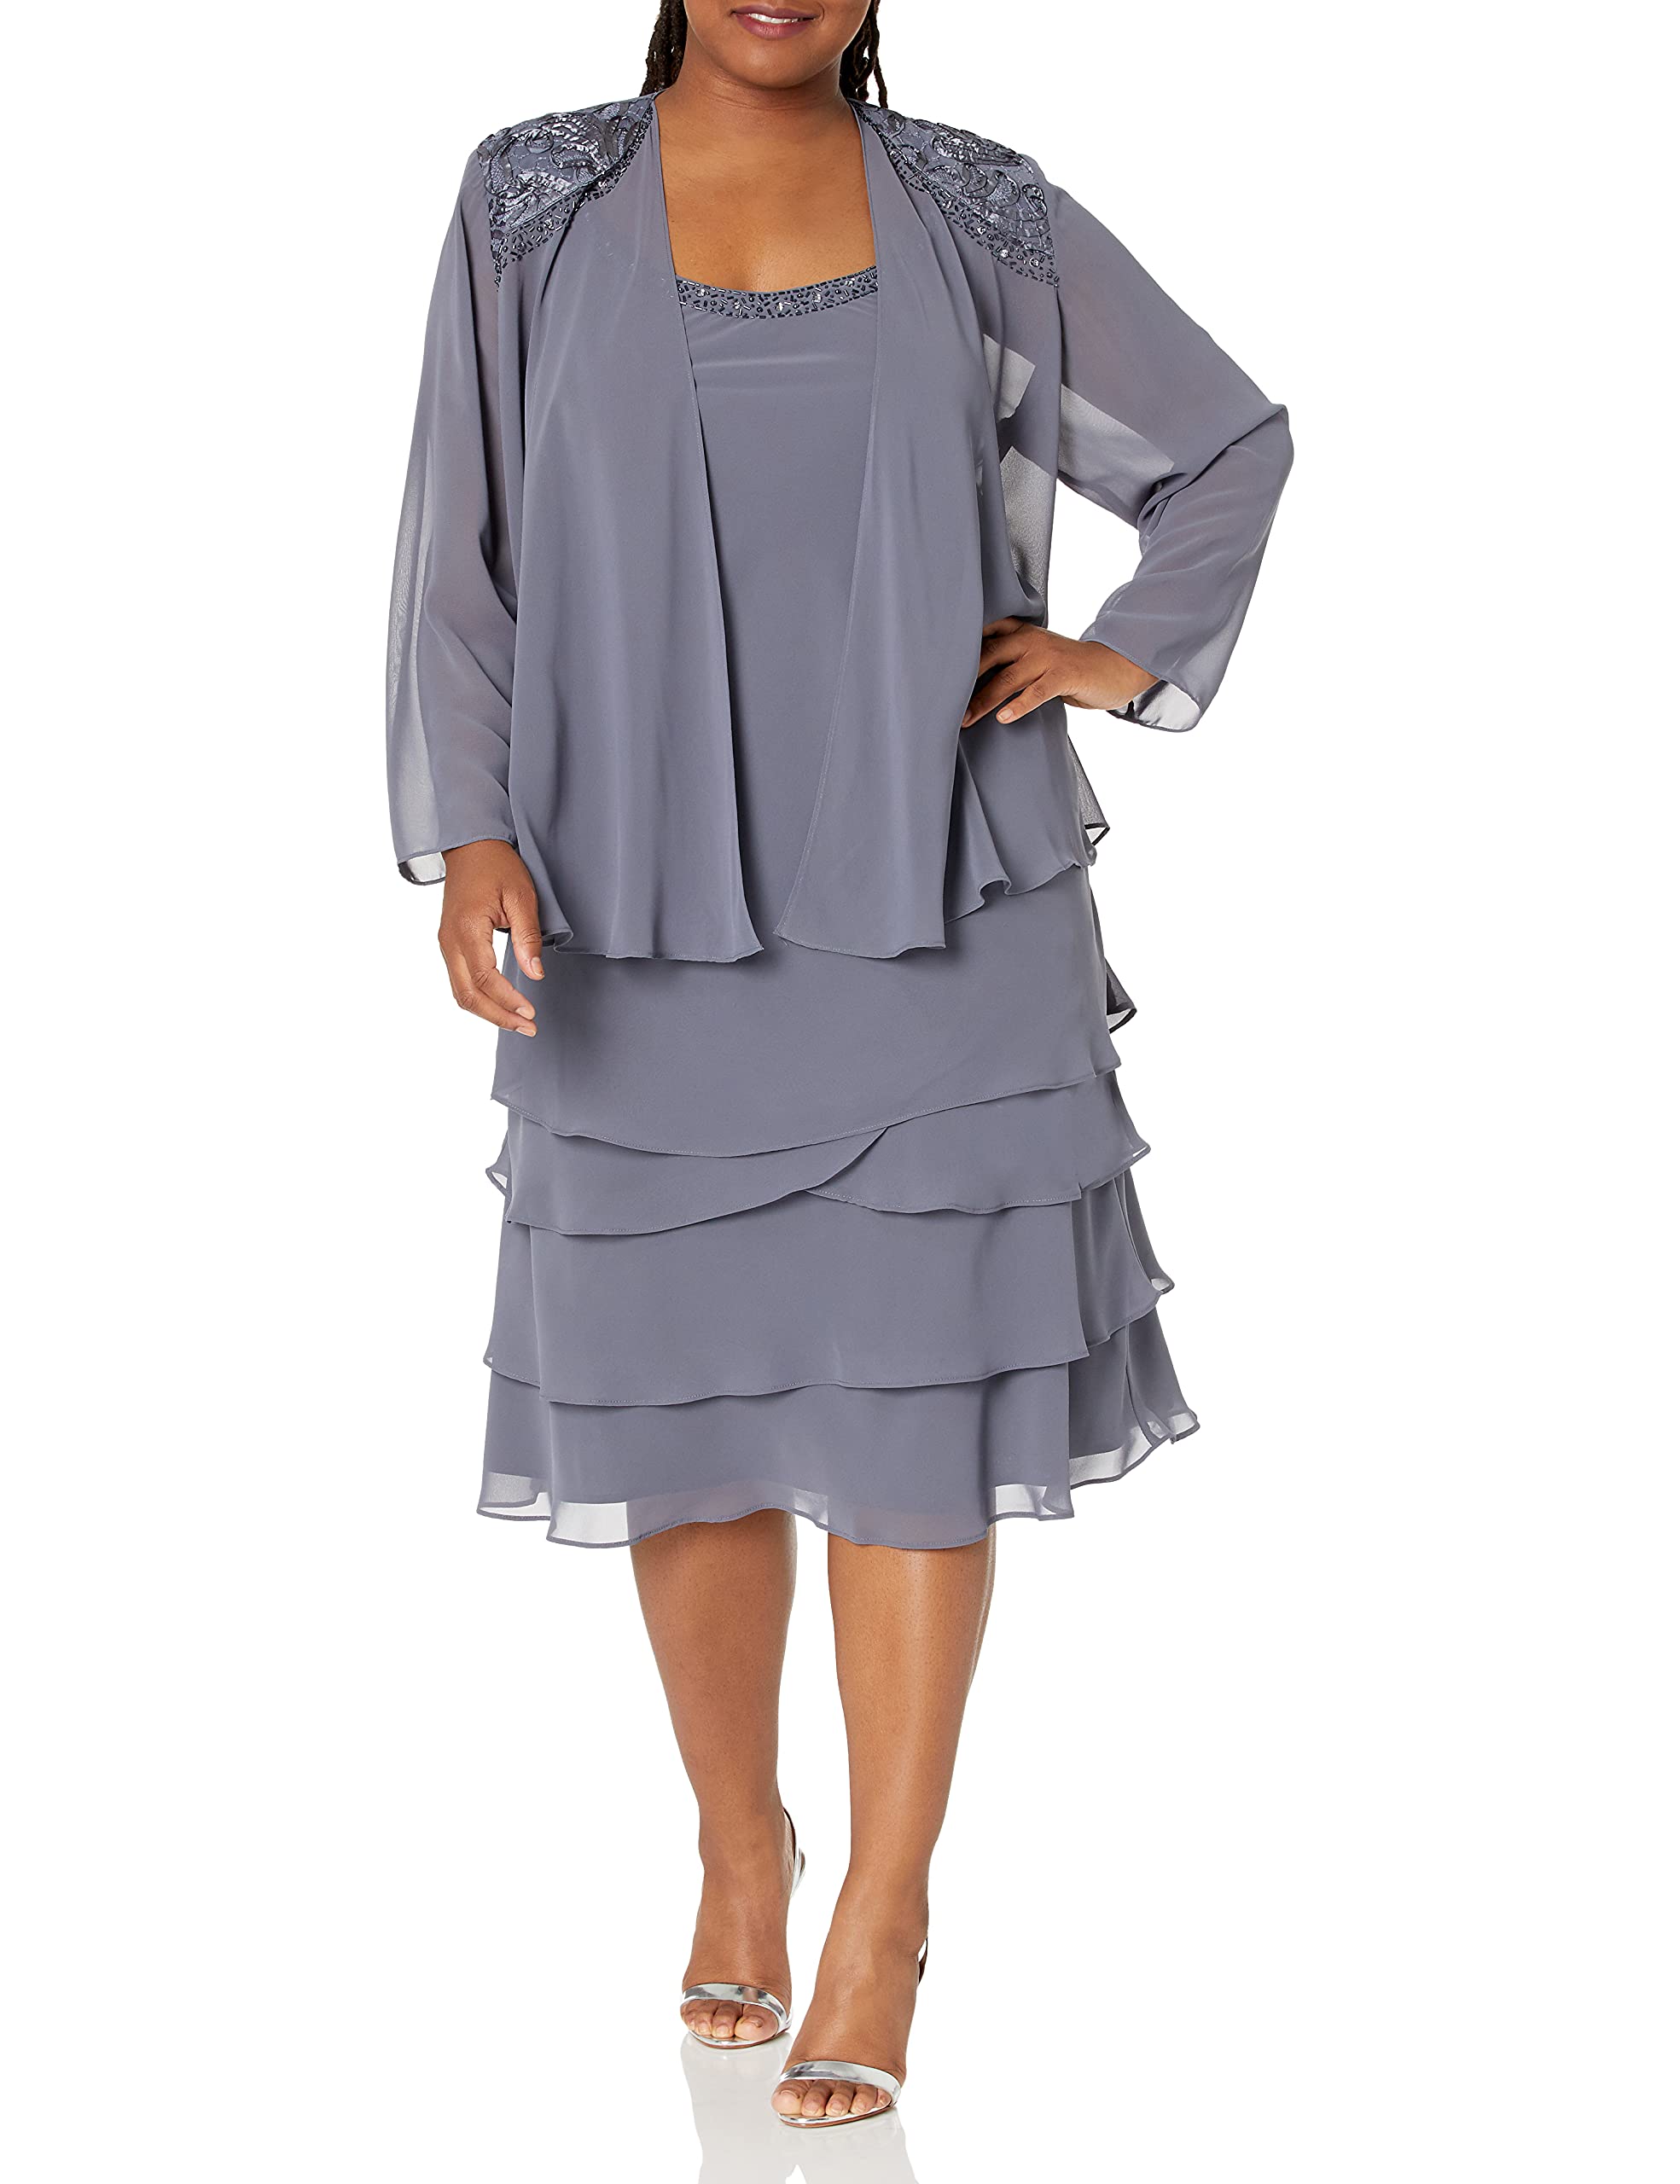 S.L. Fashions Women's Plus Size Embellished Tiered Jacket Dress-Discontinued